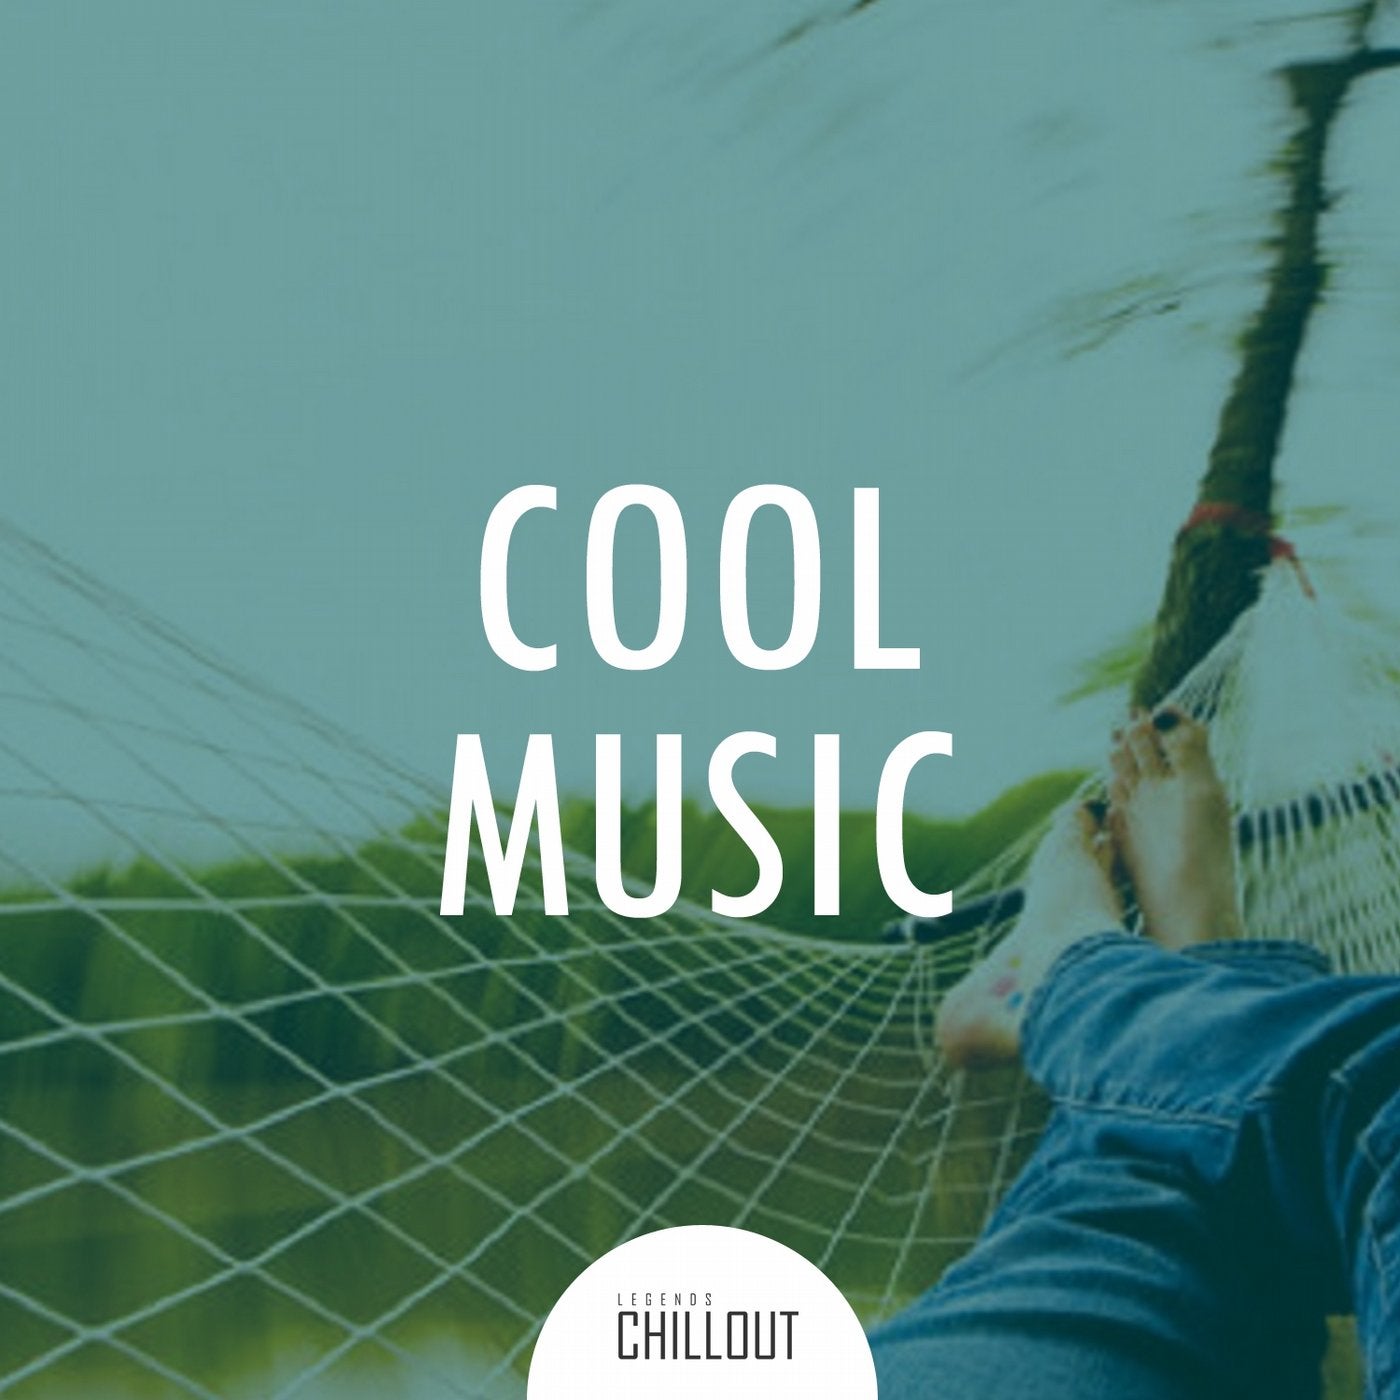 2017 Cool Chillout Music - Bestsellers